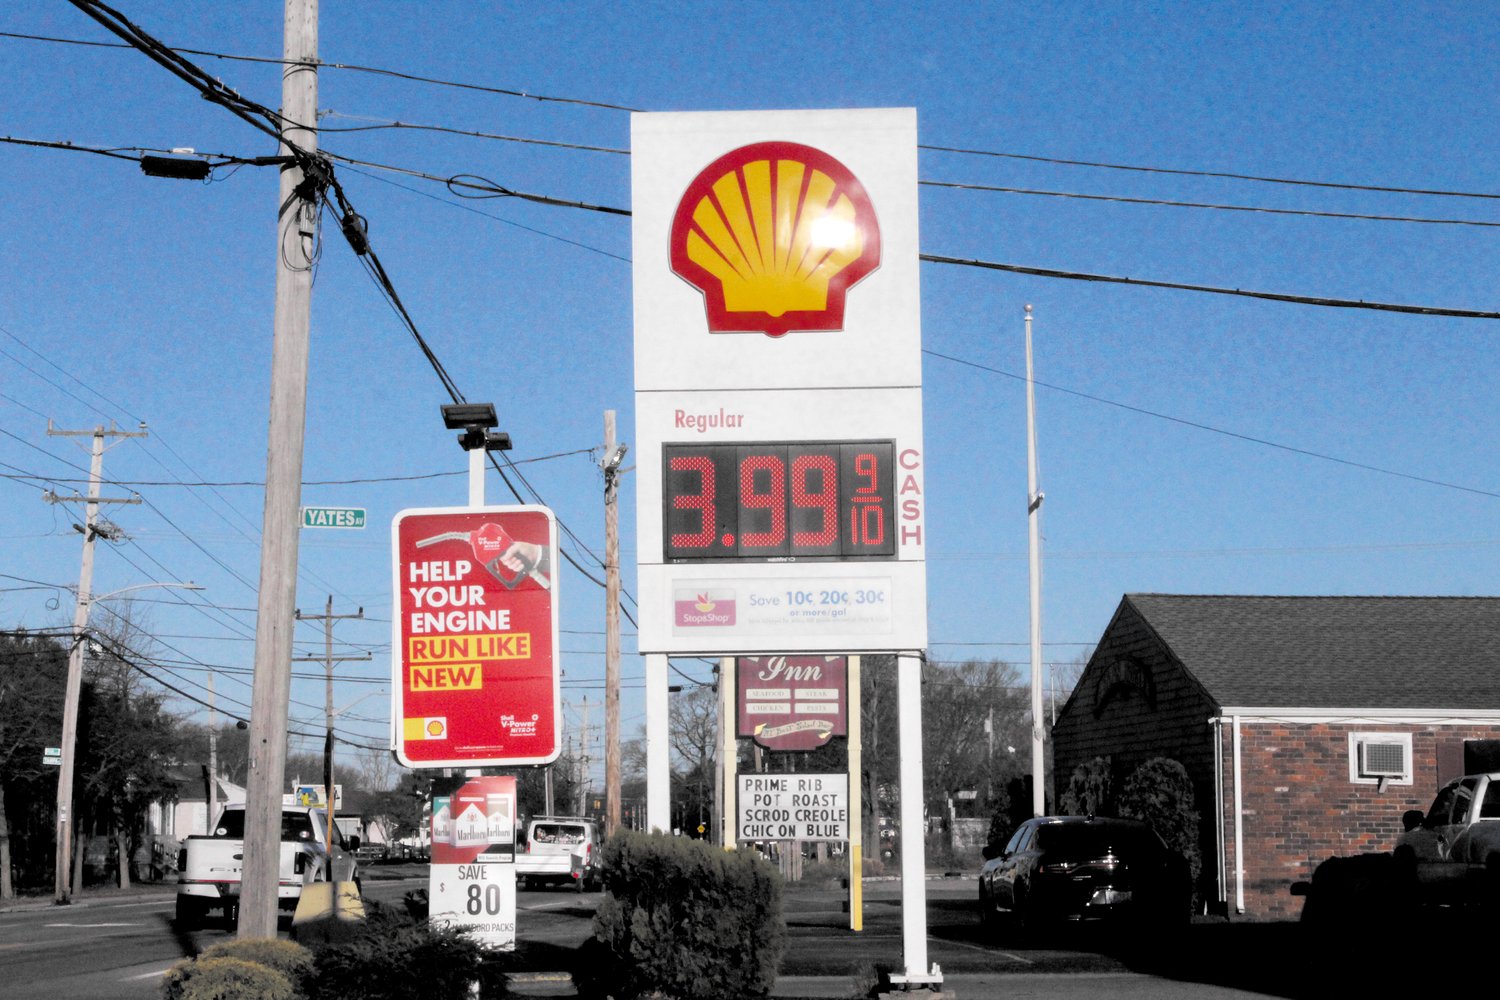 UNDER THE $4 BARRIER: Gasoline prices dipped under $4 a gallon this Tuesday at some stations including this Shell station on West Shore Road in Warwick. (Beacon Communications photo)